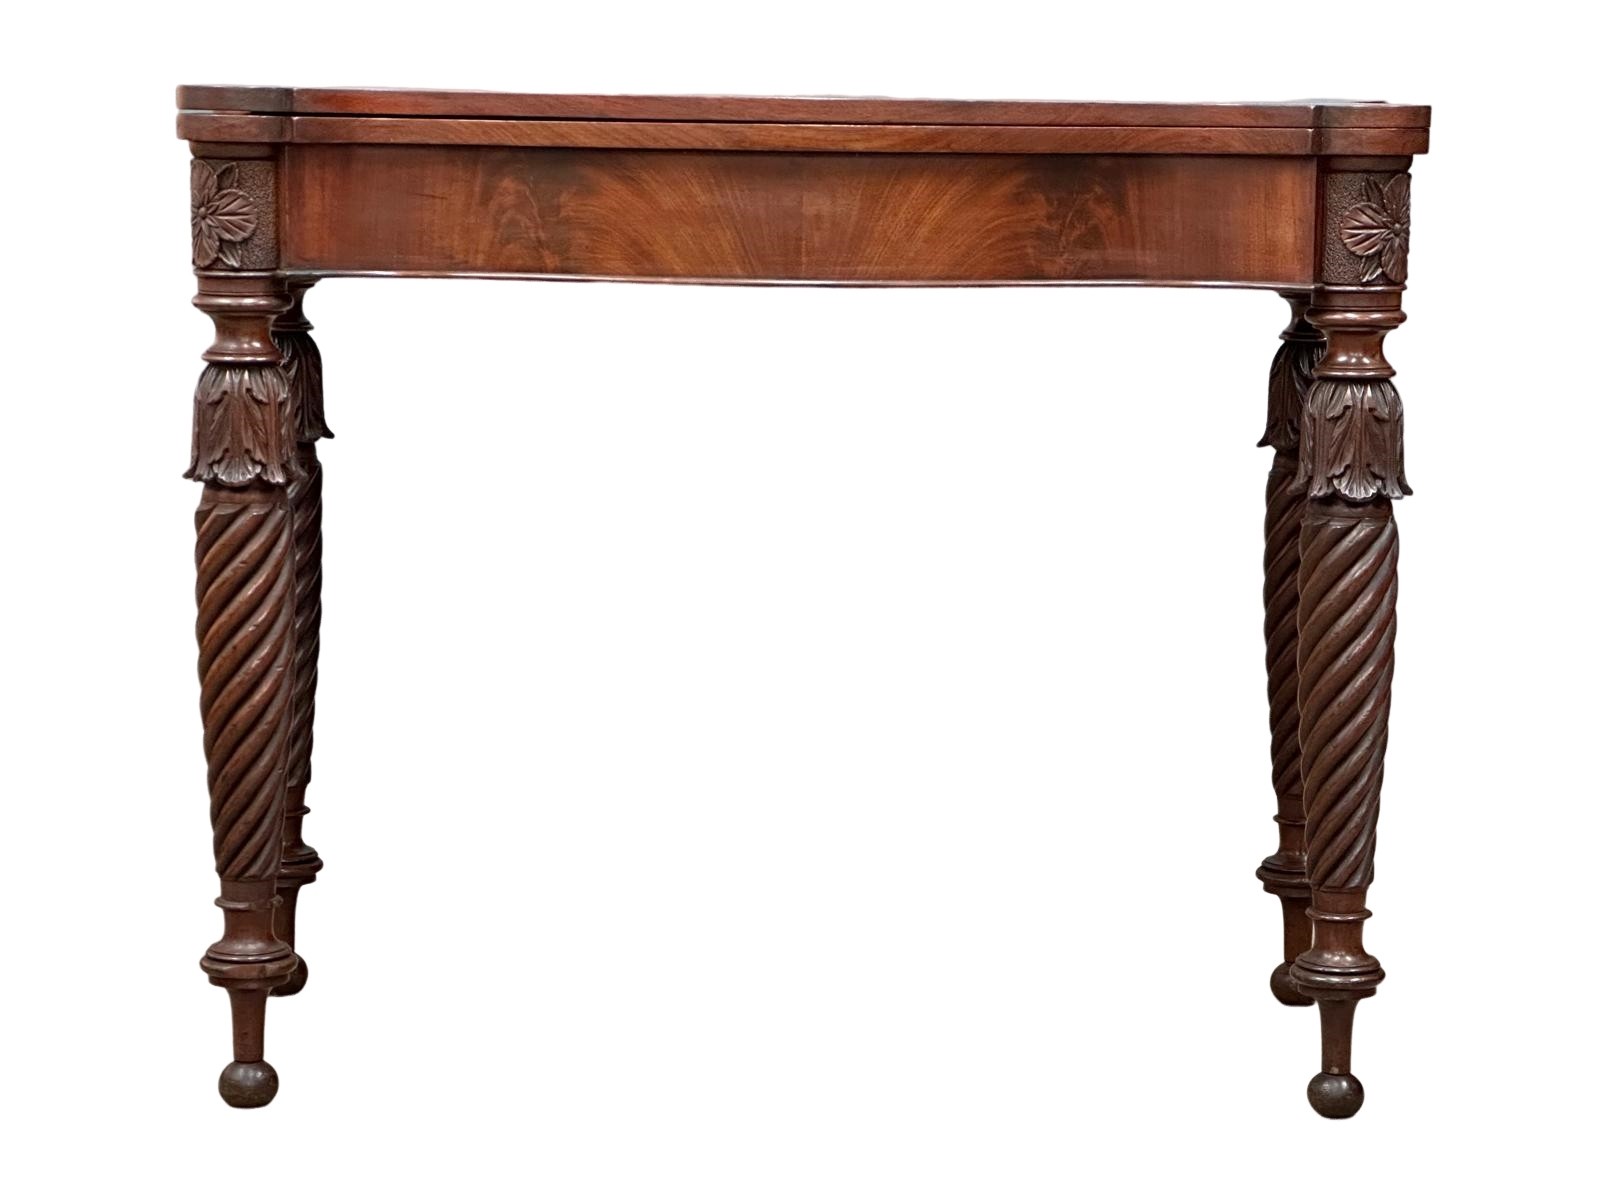 A William IV mahogany serpentine front turnover tea table on turned legs. Circa 1830. 87x44x75cm - Image 9 of 9